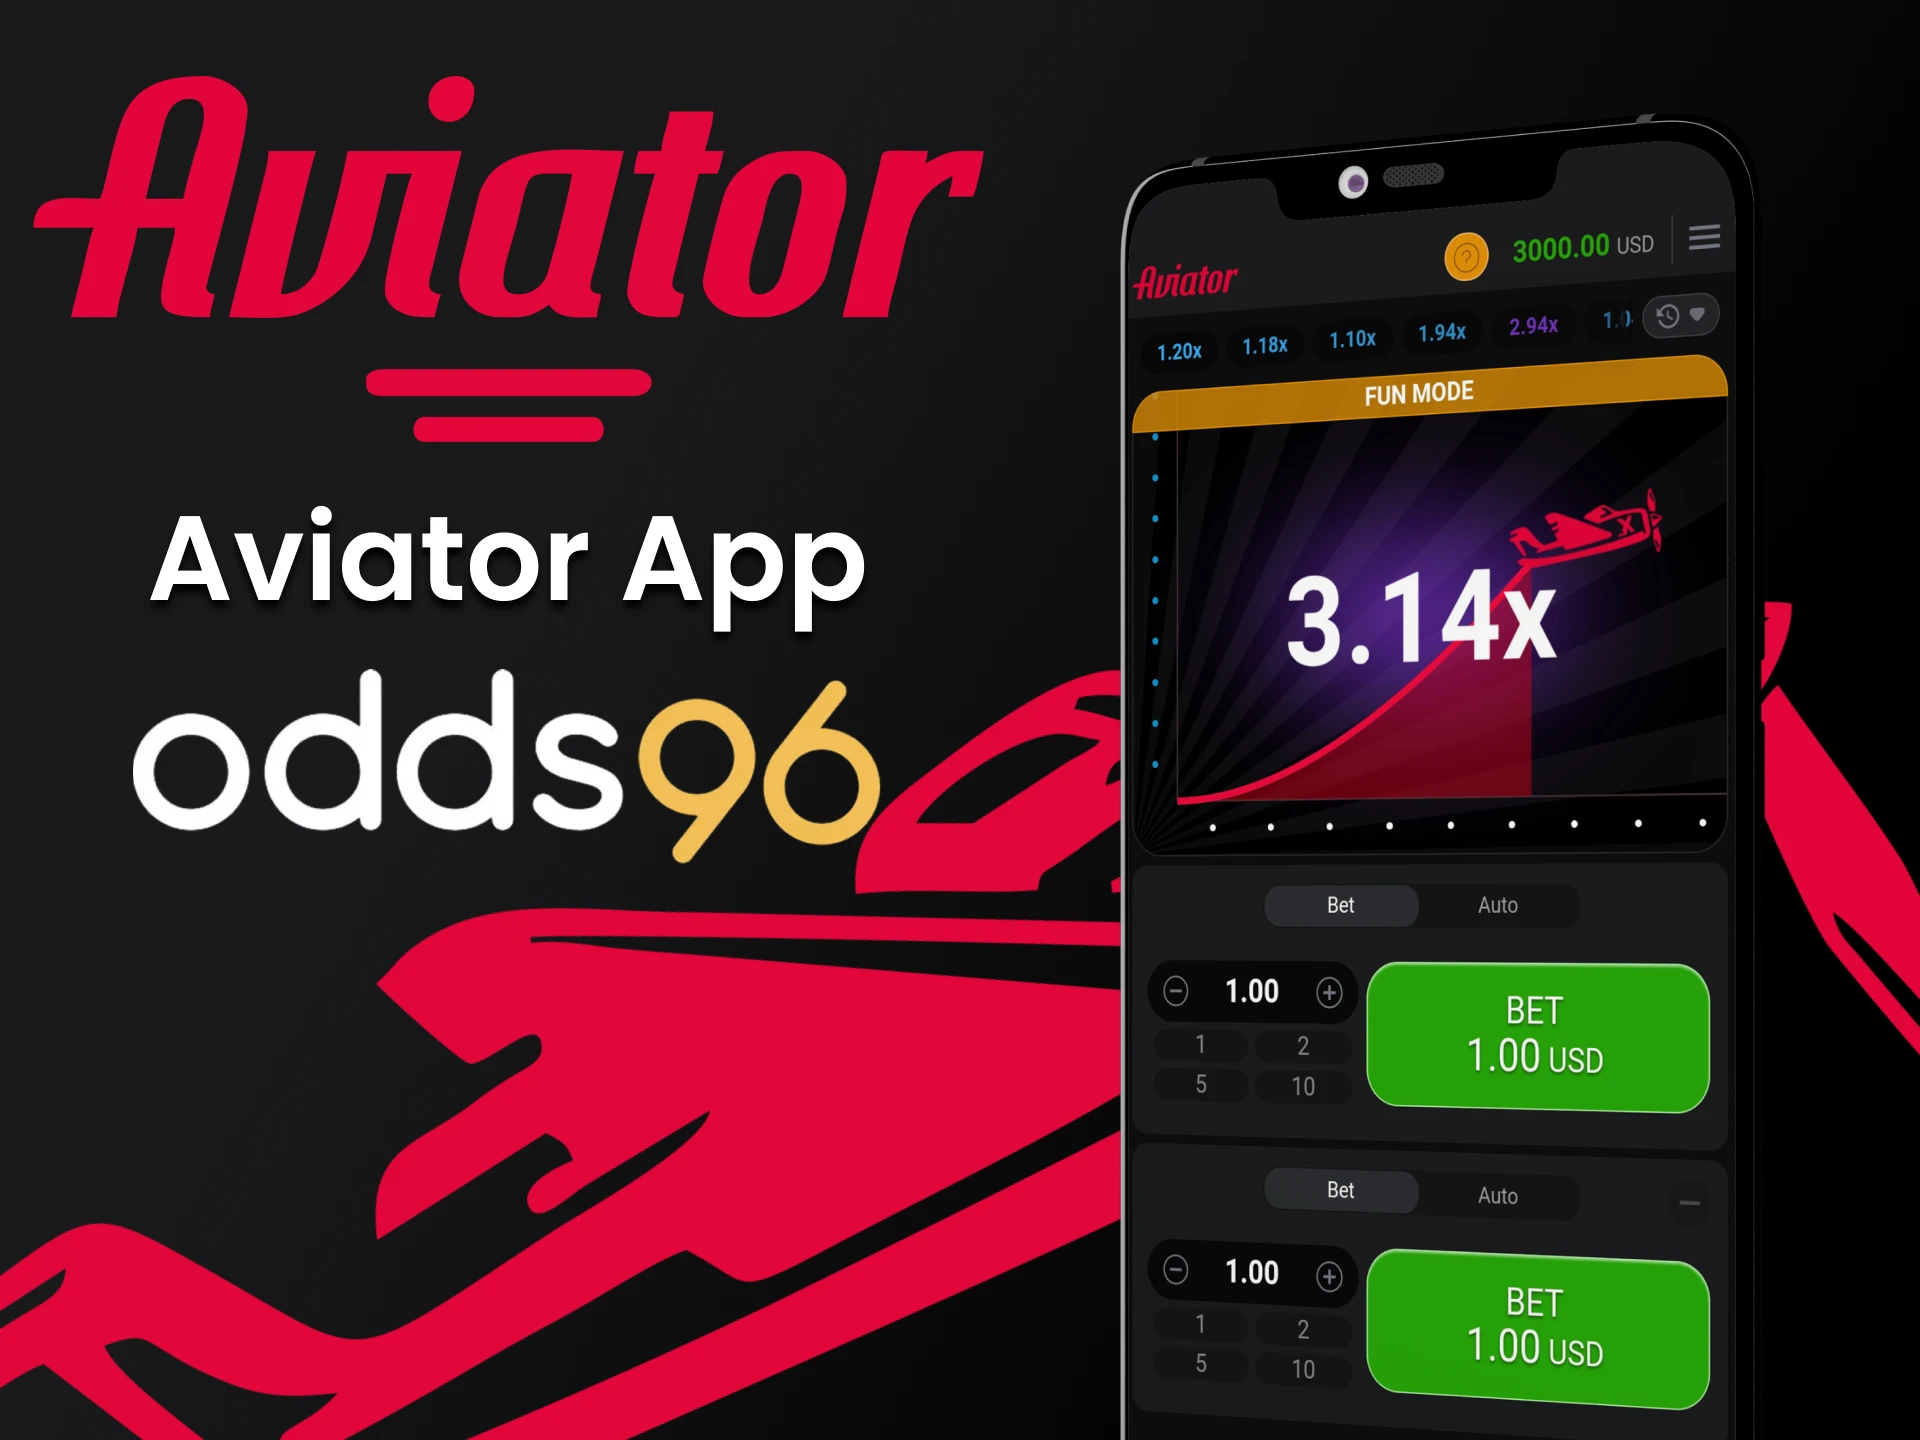 For games in Aviator use the odds96 application.